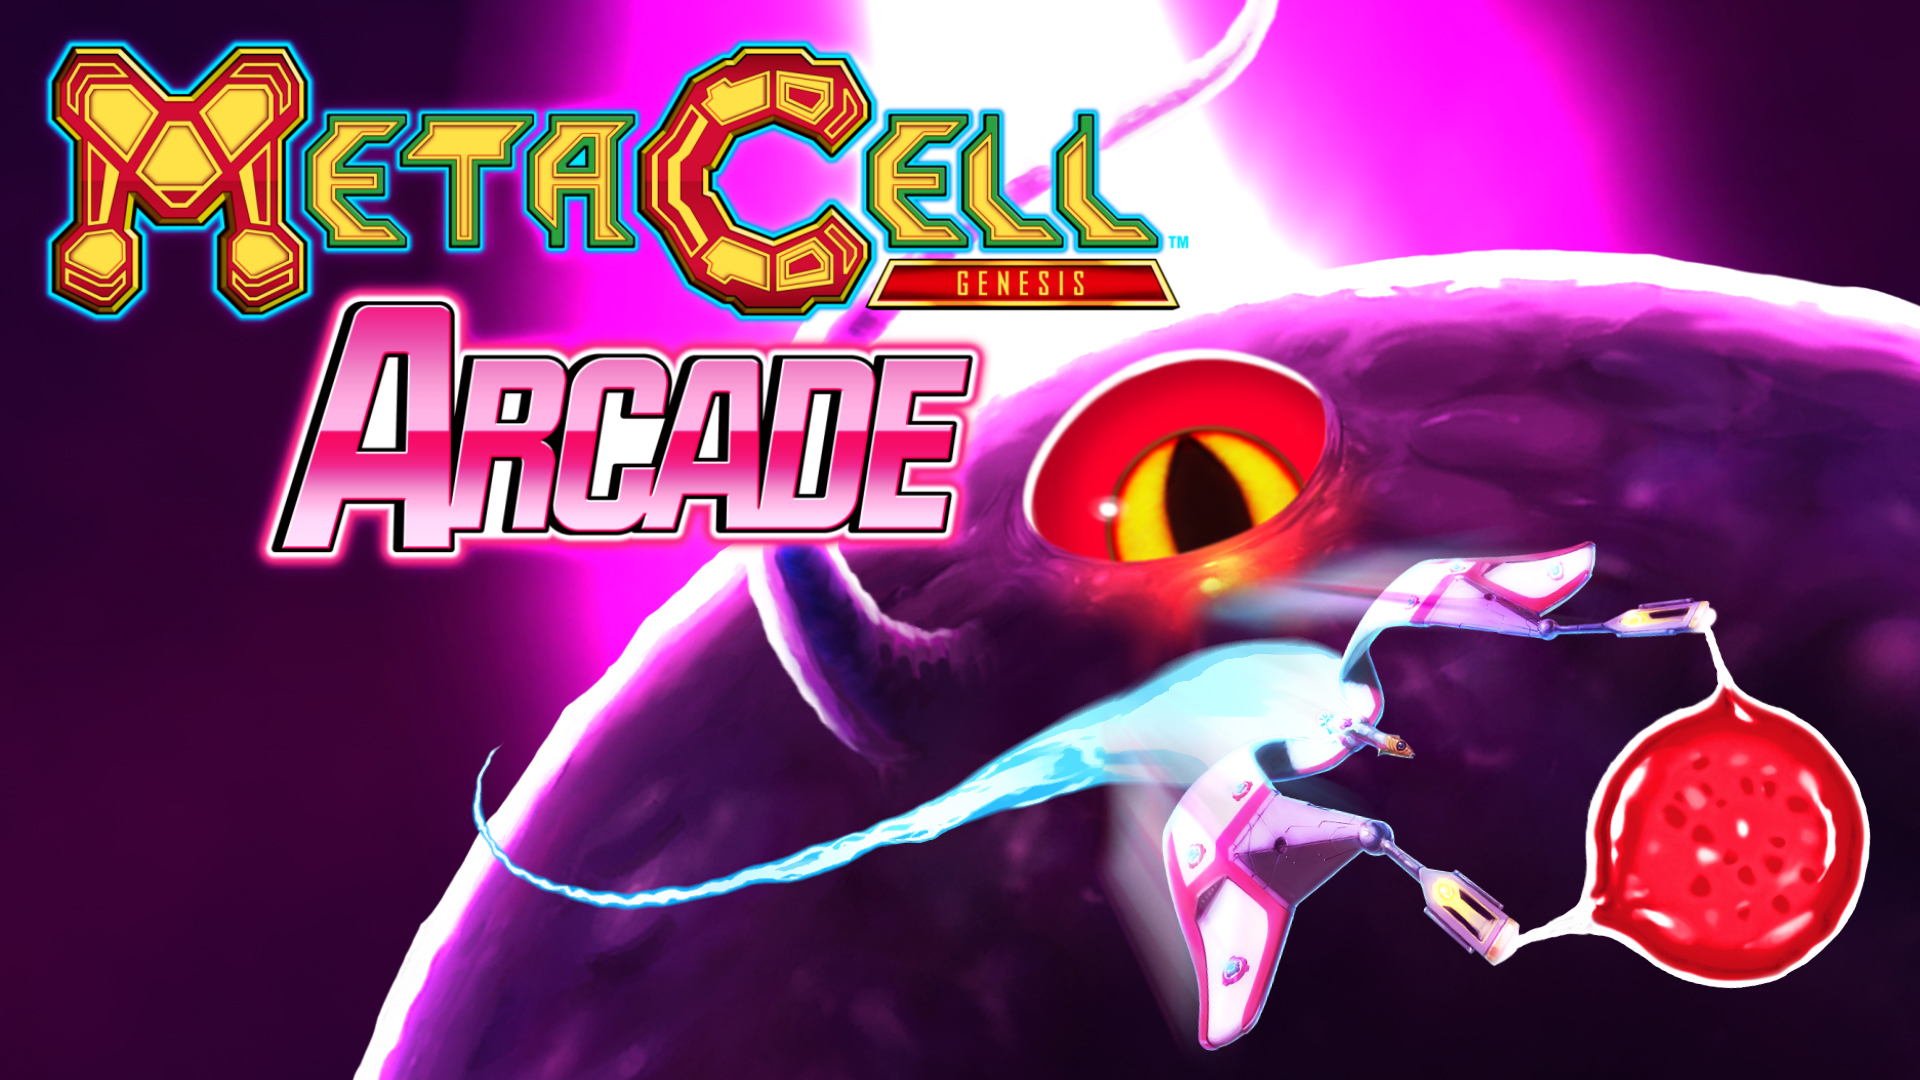 Arcade Sci-fi Match-3 Shooter Metacell: Genesis ARCADE Wins Fan Favorite Voting Round 13 at GDWC 2021!